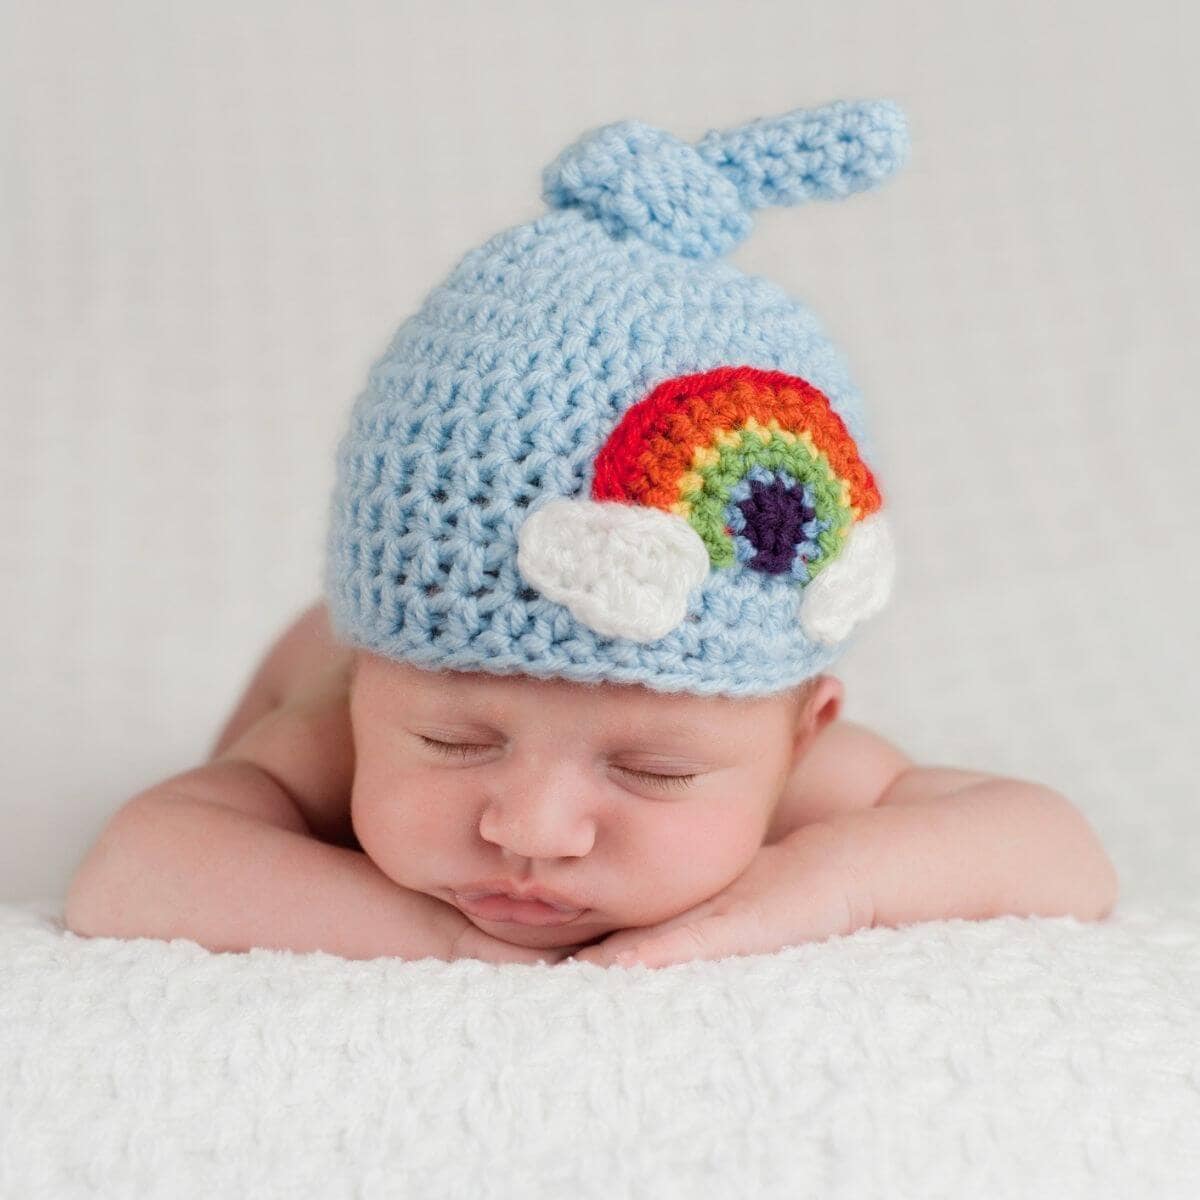 Baby Clothing Set,Newborn Baby Boys Girls Colorful Rainbow Tie-Dye Romper Jumpsuit Clothes 